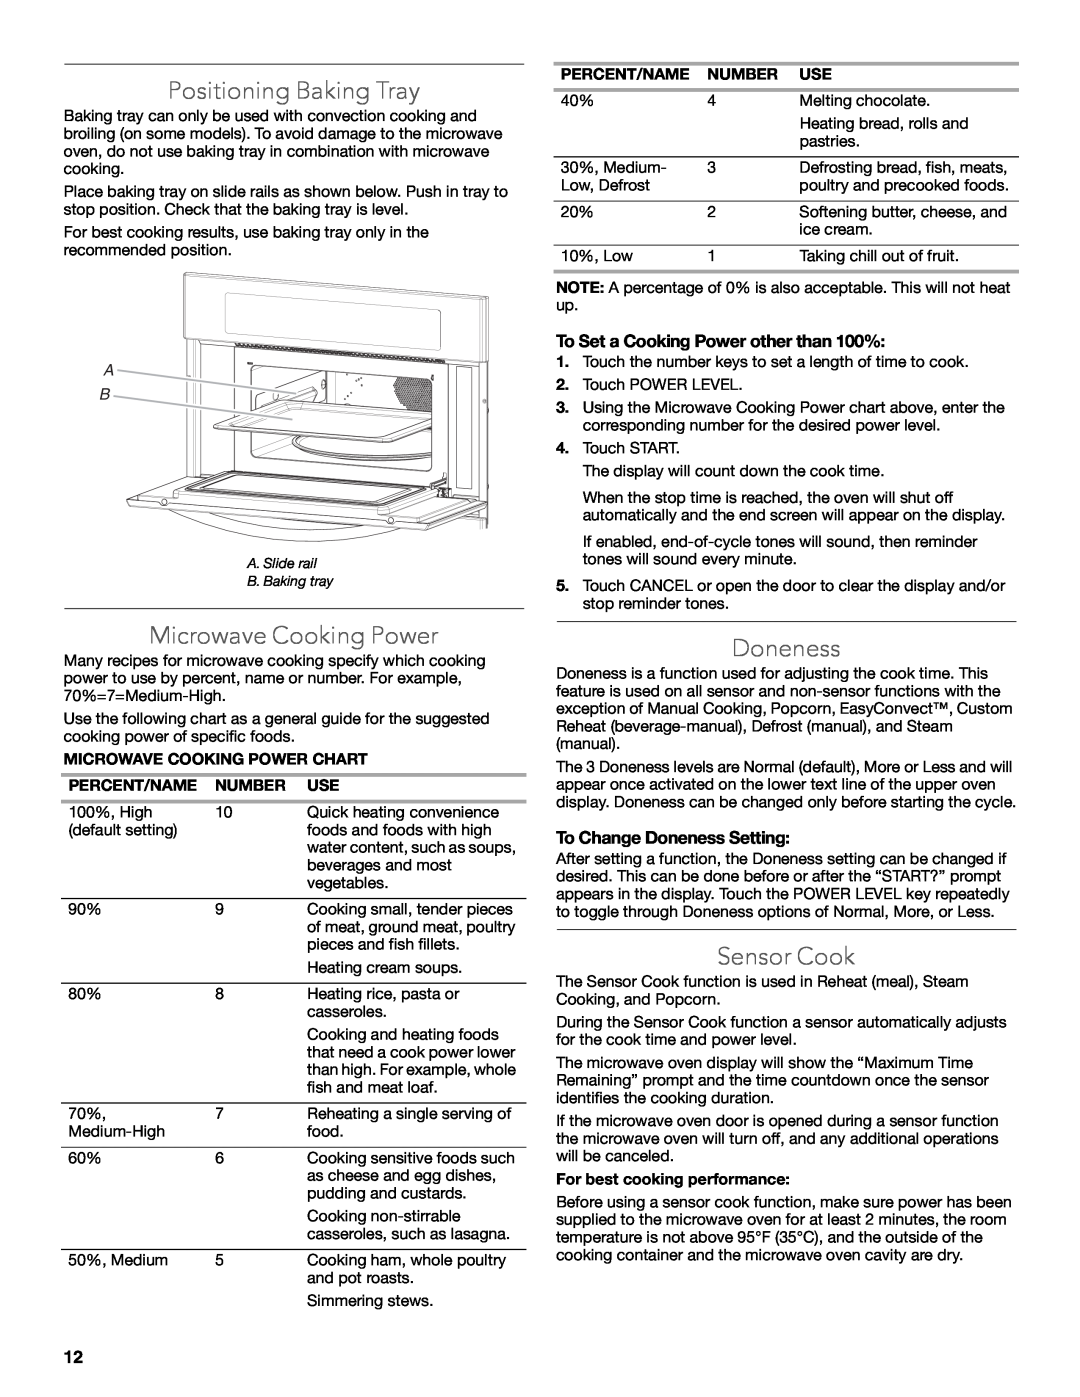 KitchenAid KBHS179B manual Positioning Baking Tray, Microwave Cooking Power, Sensor Cook, To Change Doneness Setting 